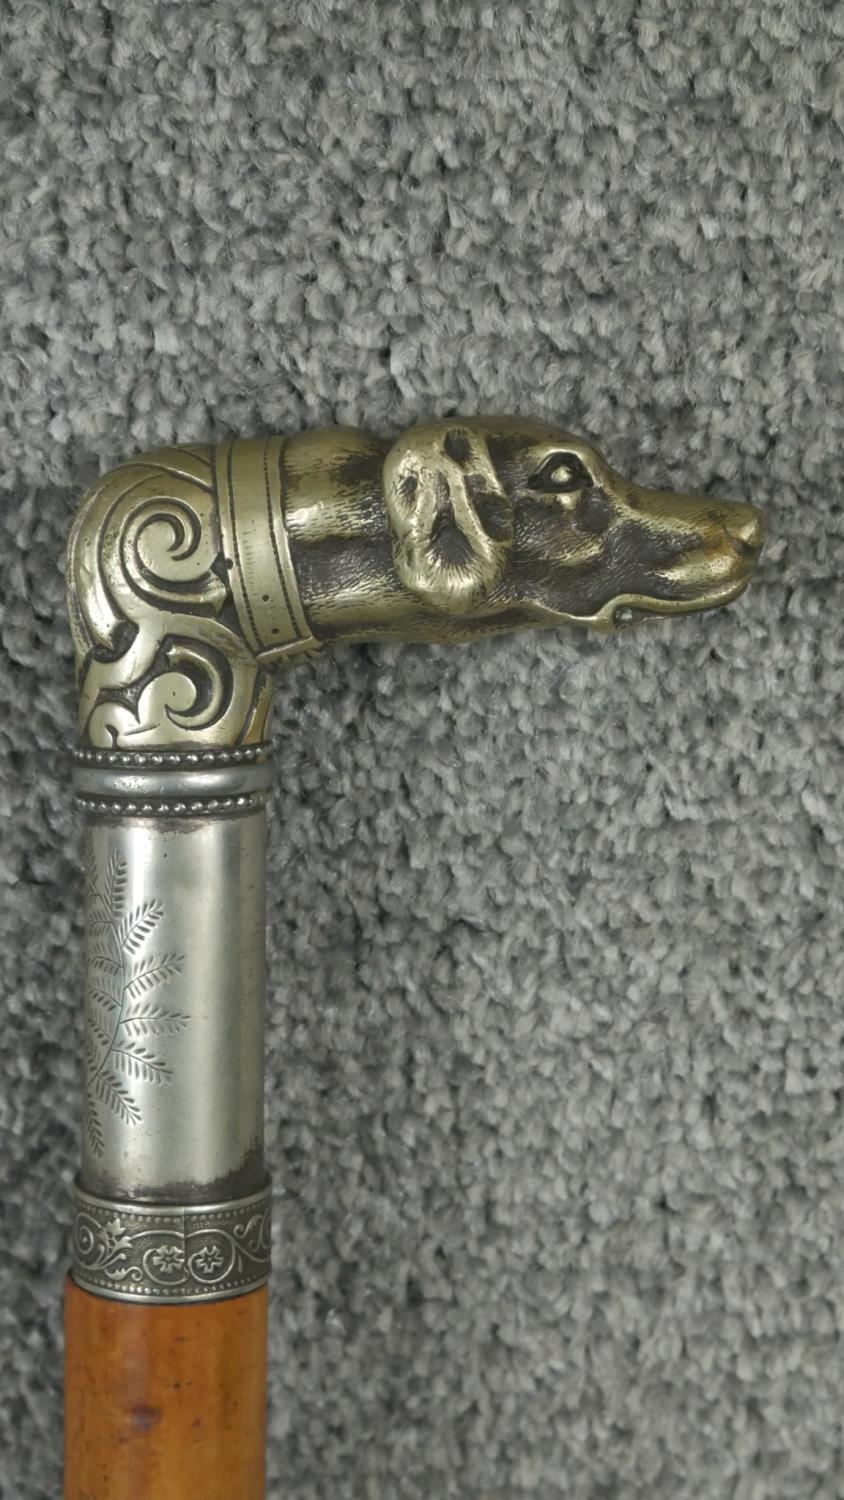 An antique silver plated walking cane with a dogs head finial and fern engraved white metal - Image 2 of 4